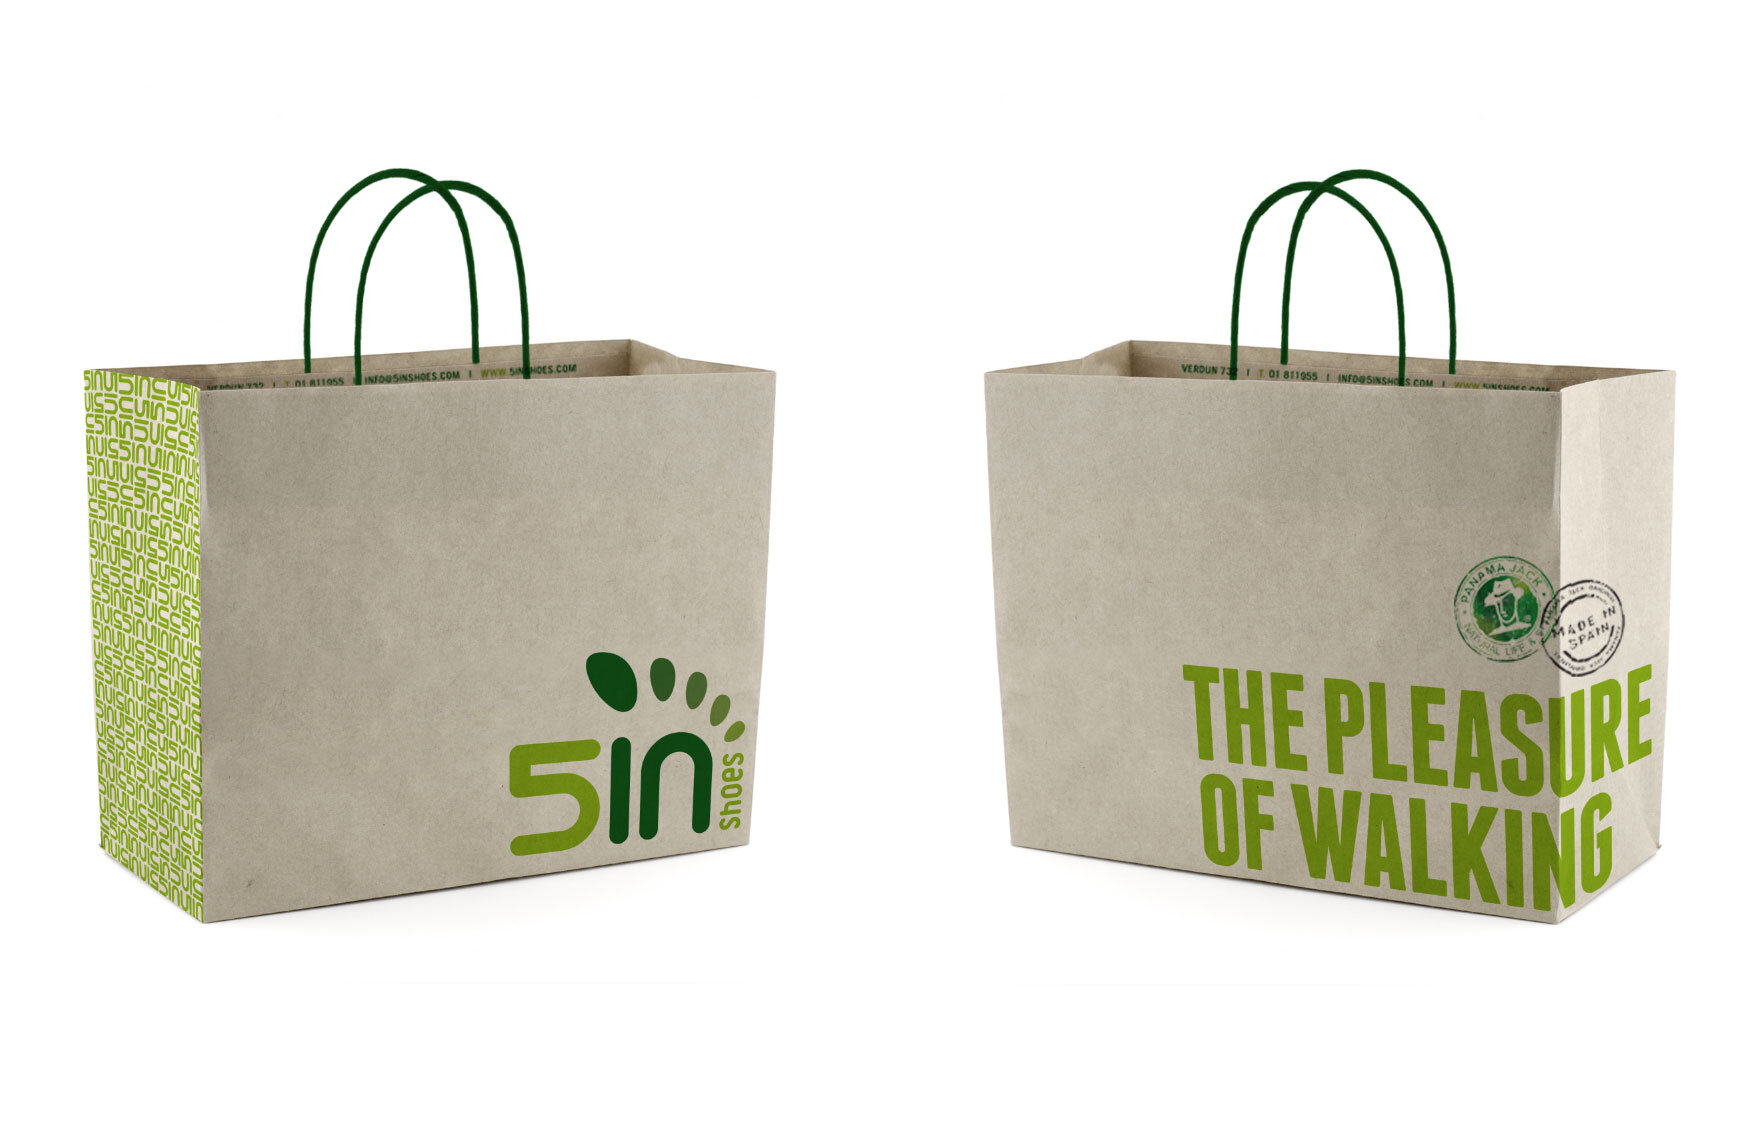 6_5in_five_in_shoes_paper_bag_slogan_structure_store_circle_visual_communication_advertising_branding_design_creative_agency.jpg